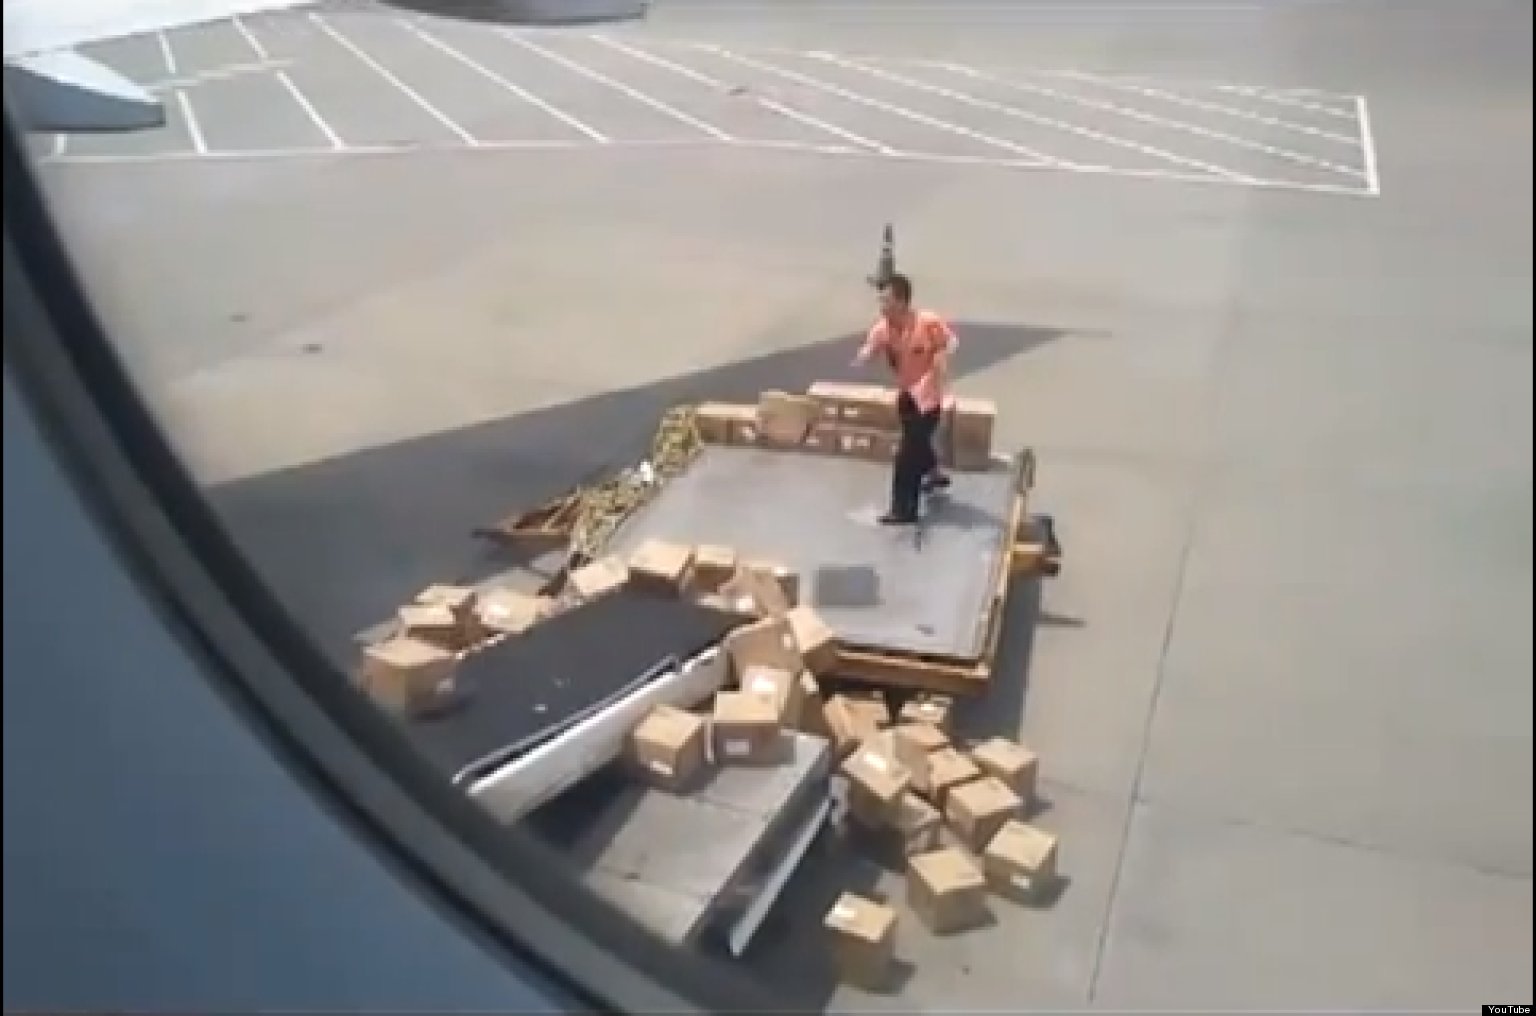 o-CHINA-AIR-FREIGHT-WORKER-THROWS-BOXES-